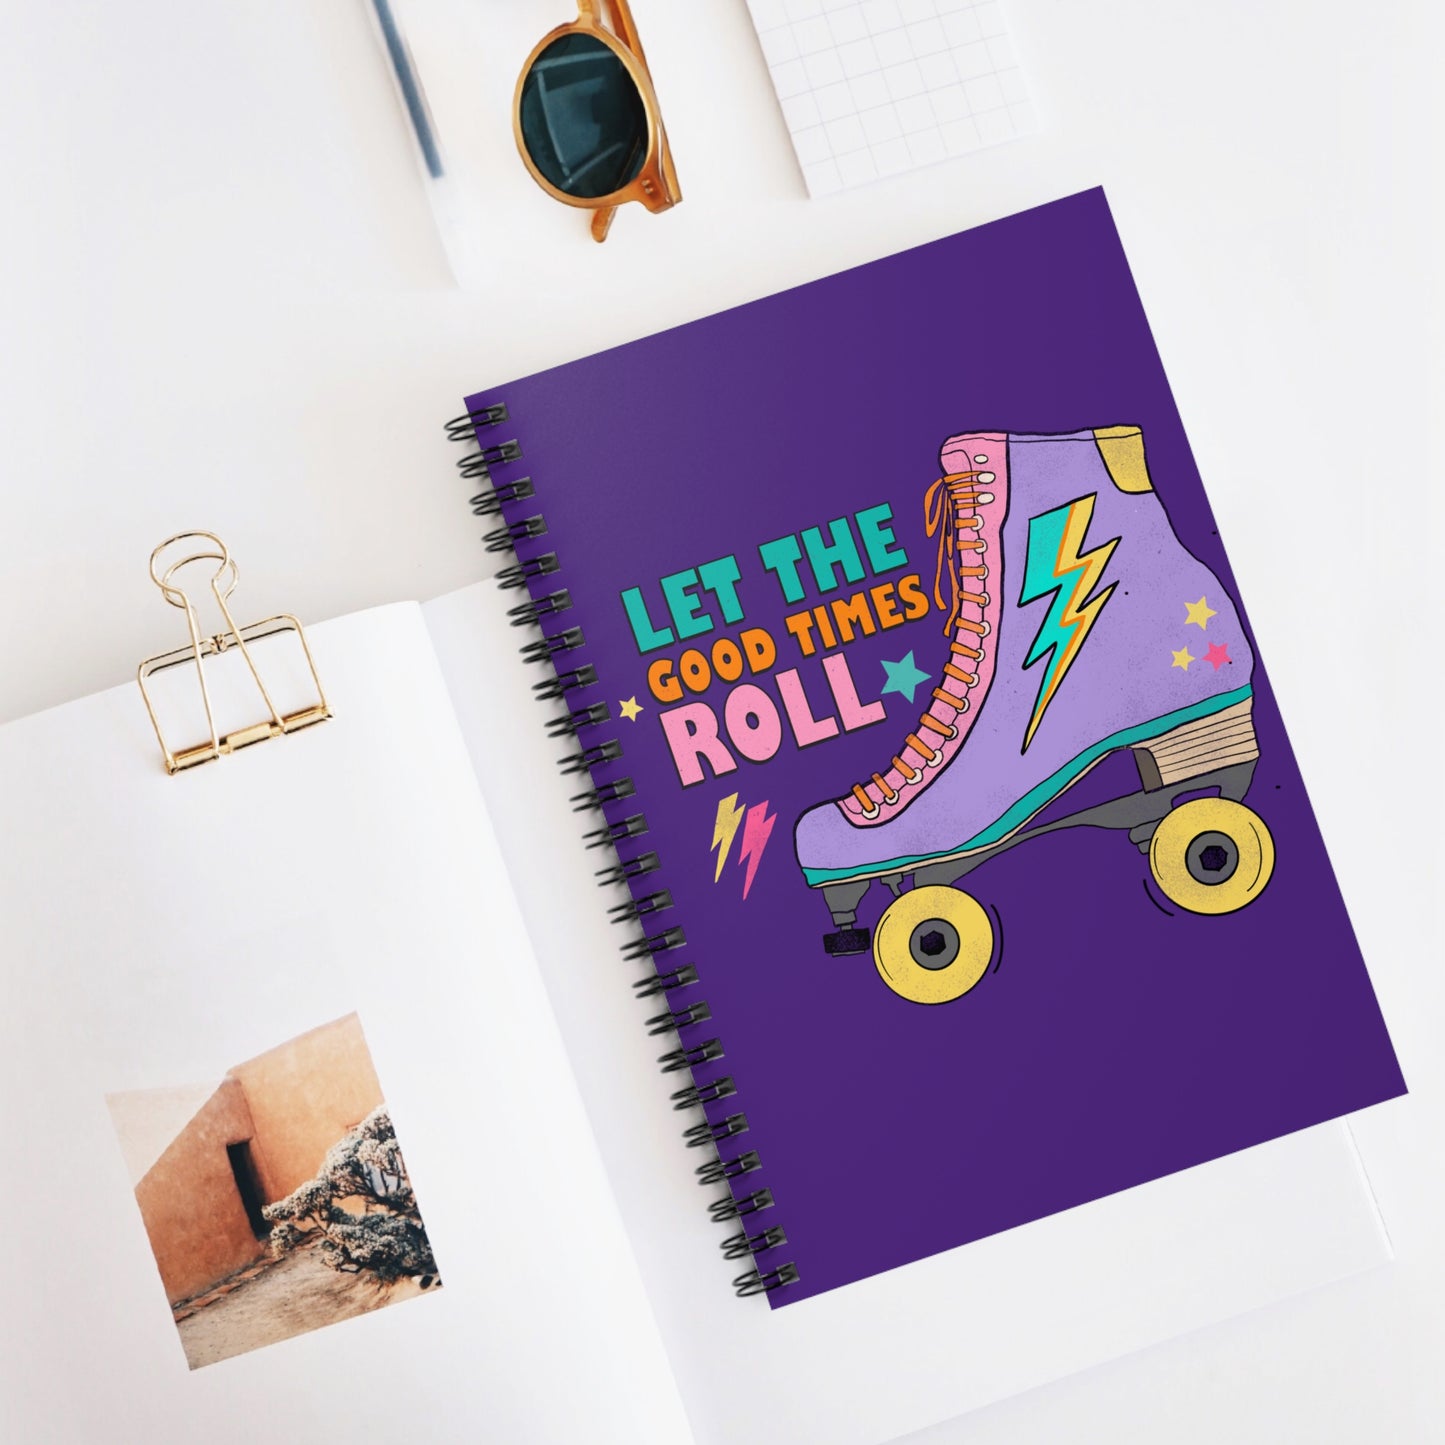 Let the Good Times Roll: Spiral Notebook - Log Books - Journals - Diaries - and More Custom Printed by TheGlassyLass